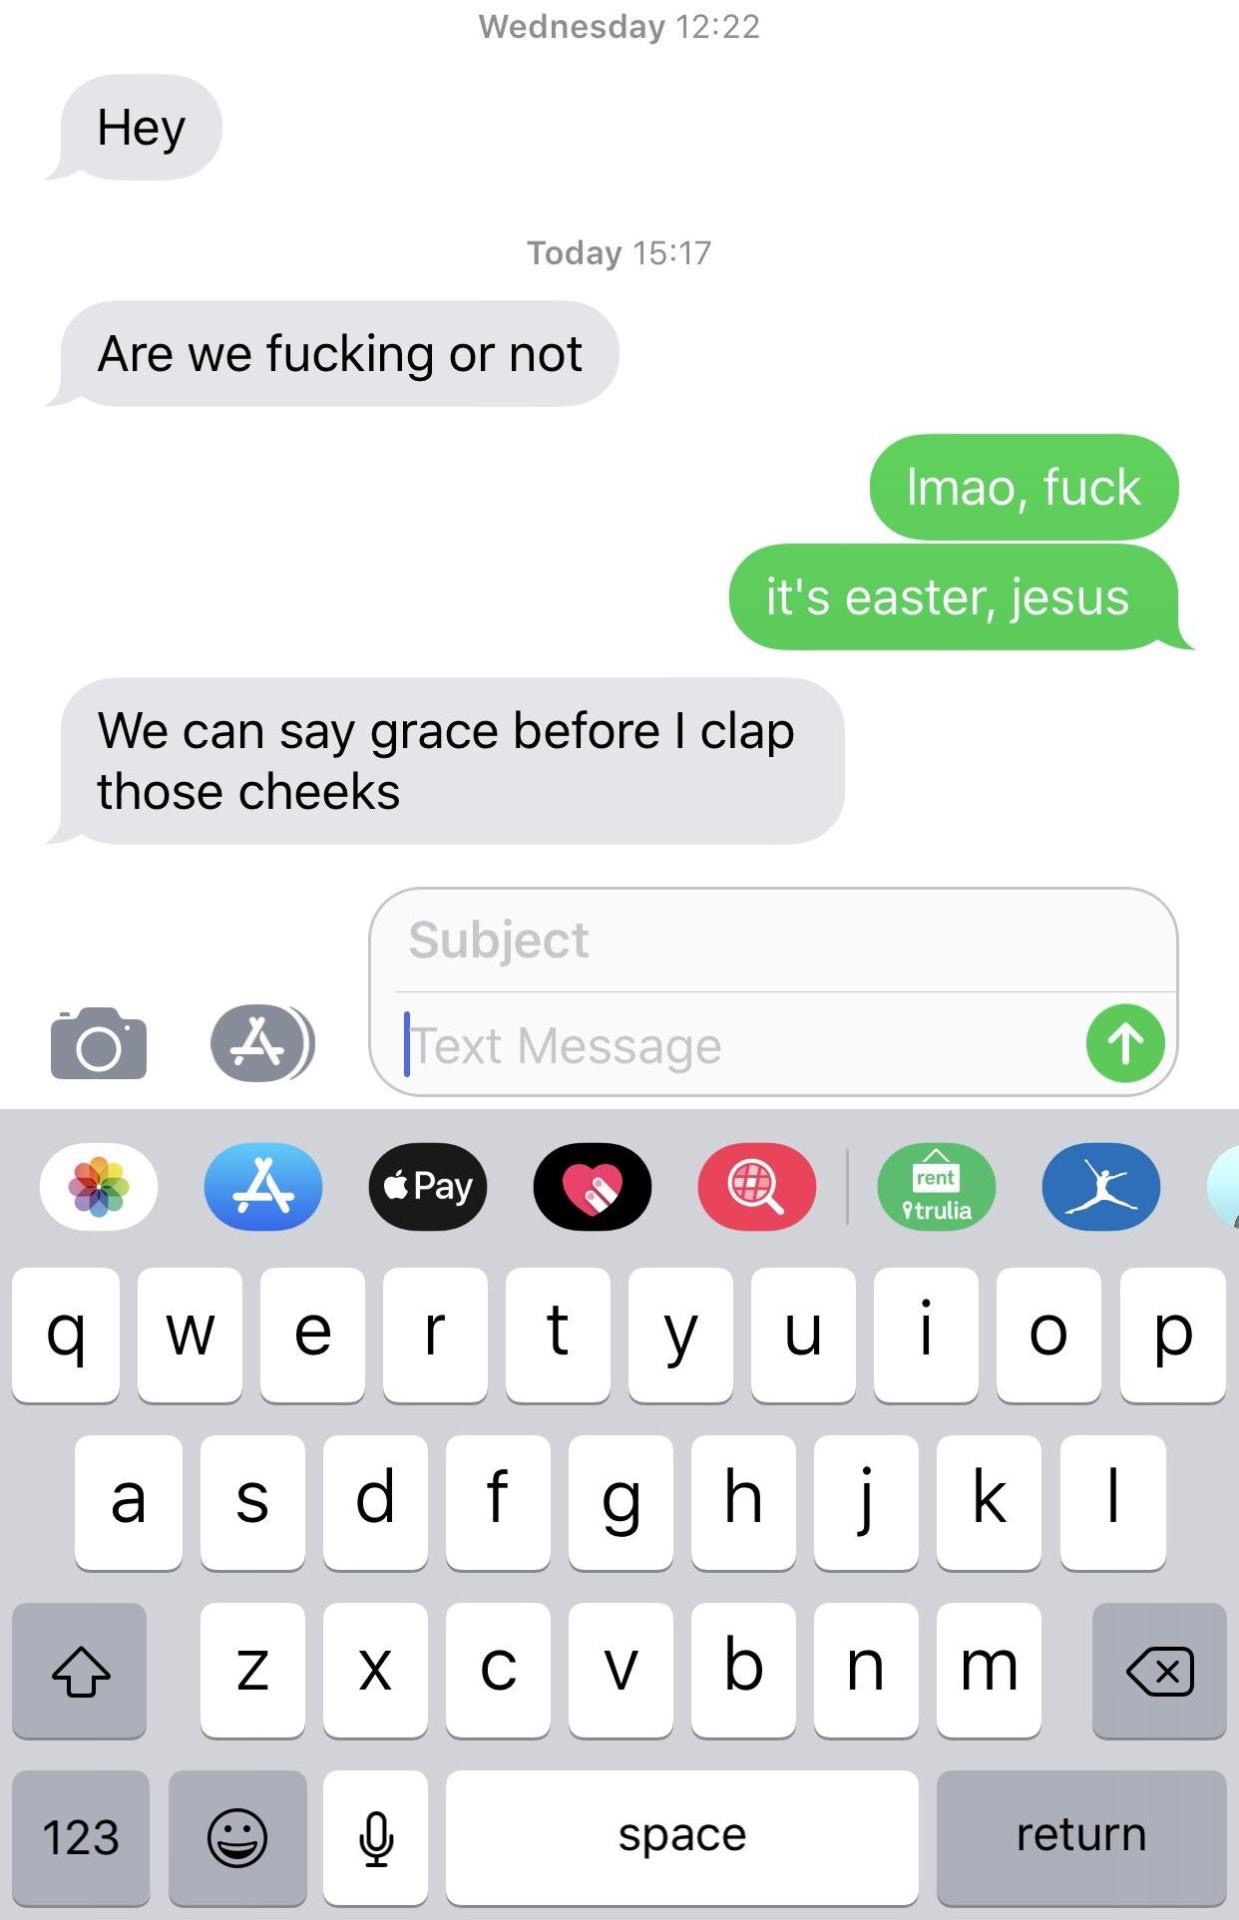 tinder - tana mongeau finsta - Wednesday Hey Today Are we fucking or not Imao, fuck it's easter, jesus We can say grace before I clap those cheeks Subject A JText Message rent Strulia as d f g h i ki azxcvb n m 123 space return